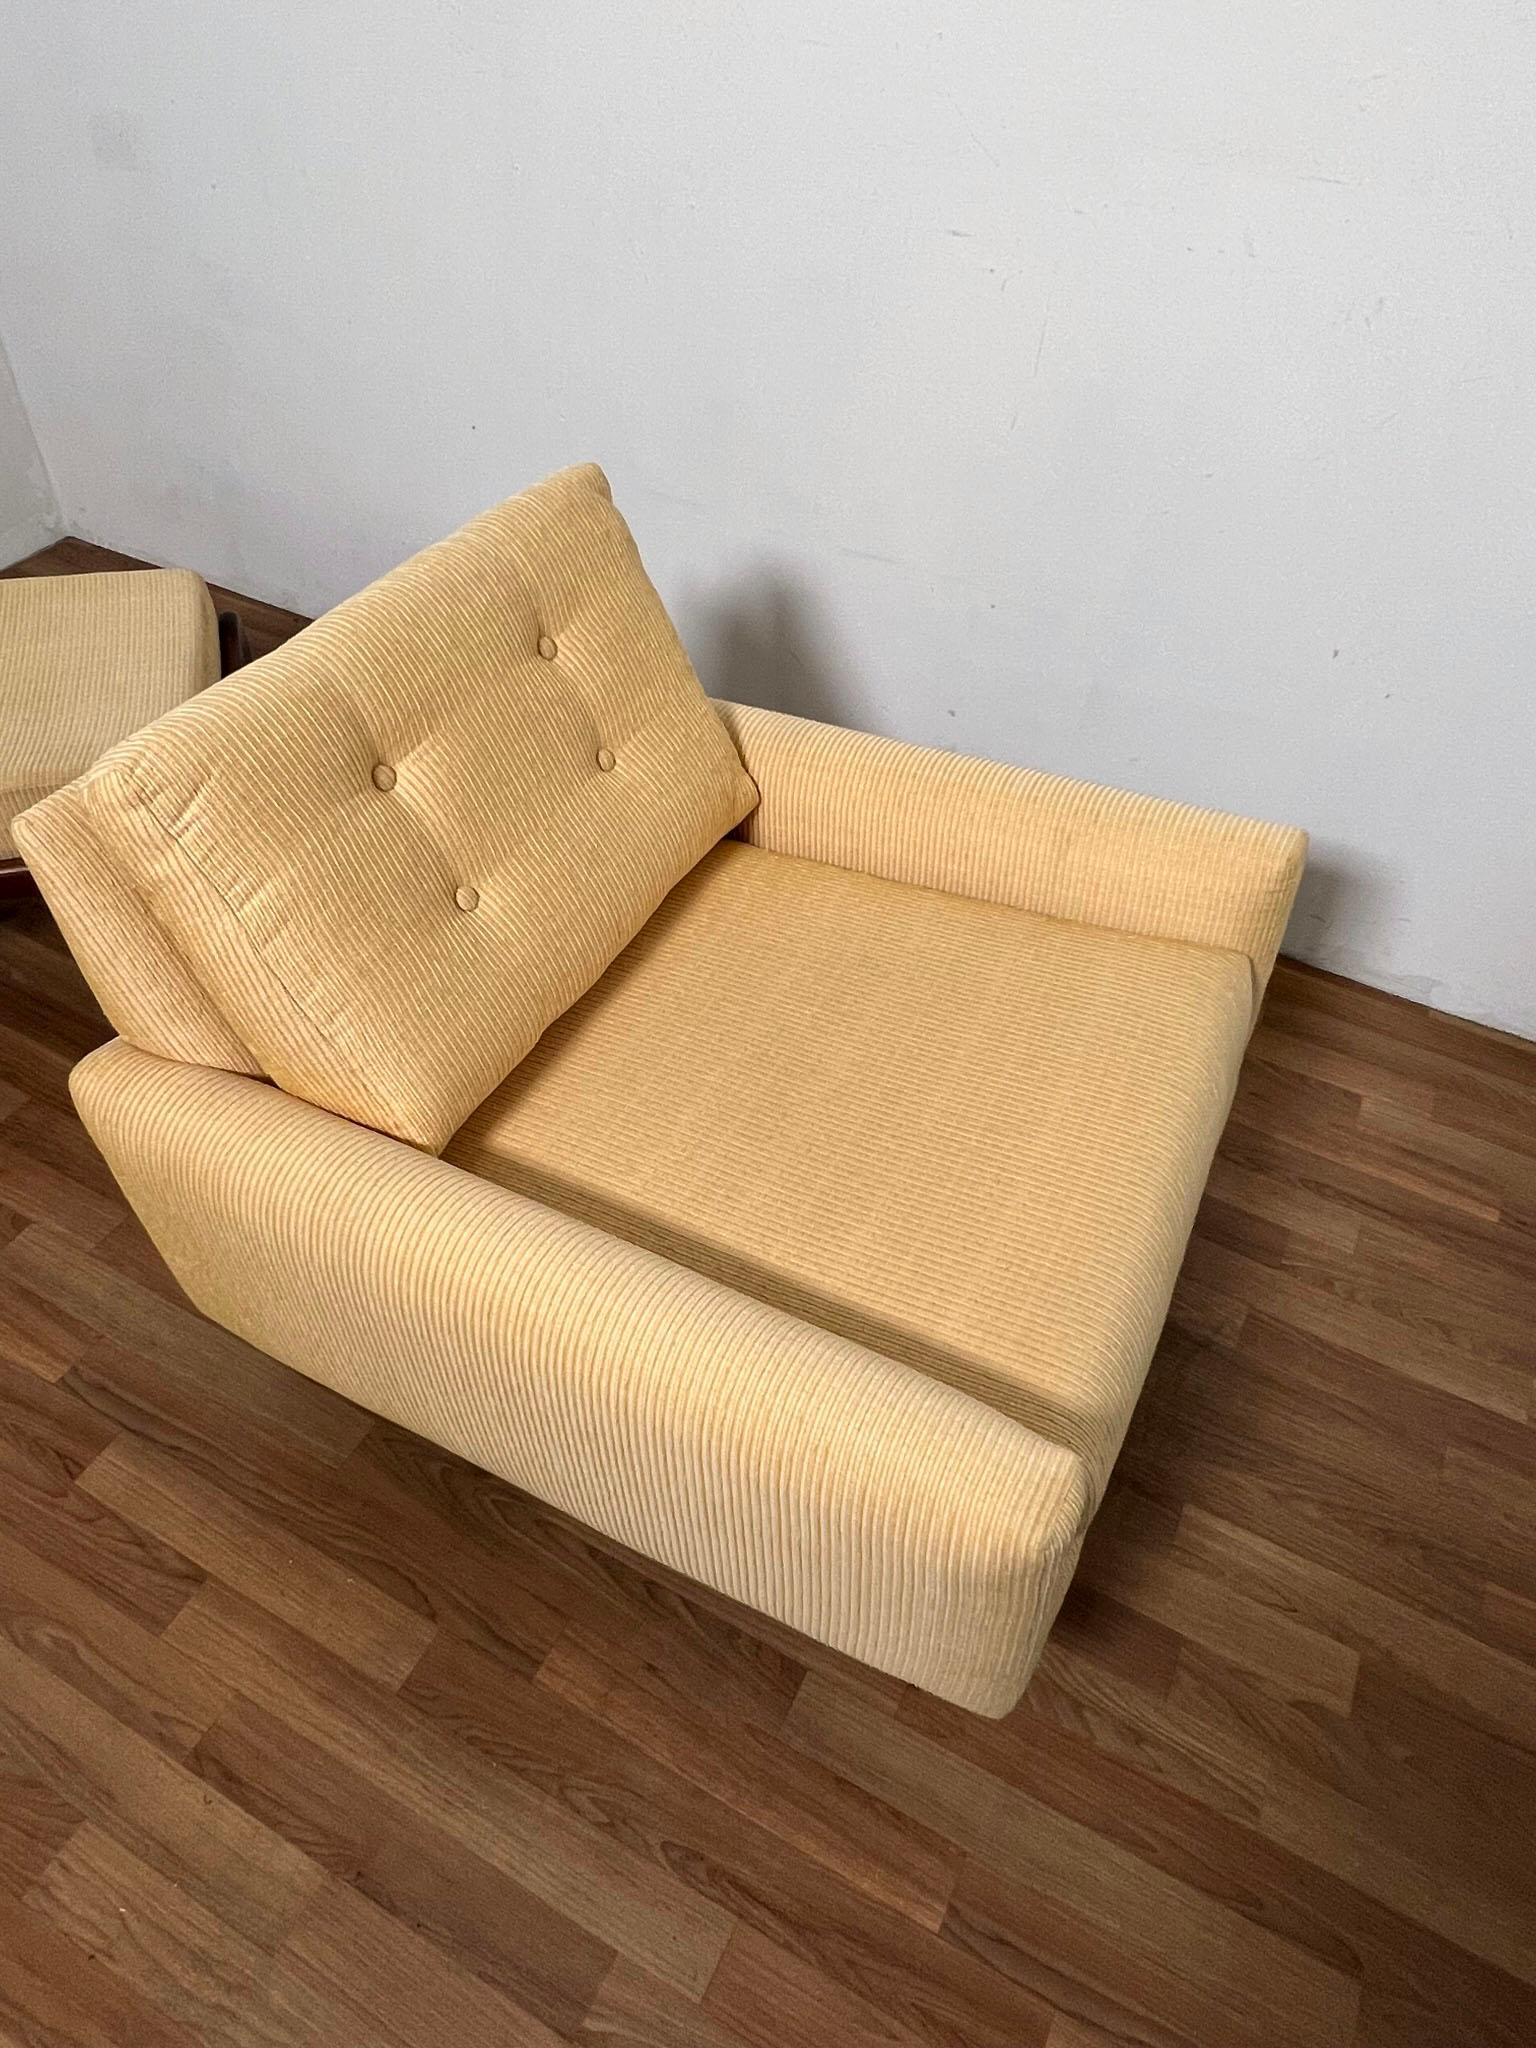 Adrian Pearsall for Craft Associates Lounge Chair and Ottoman, circa 1960s For Sale 1